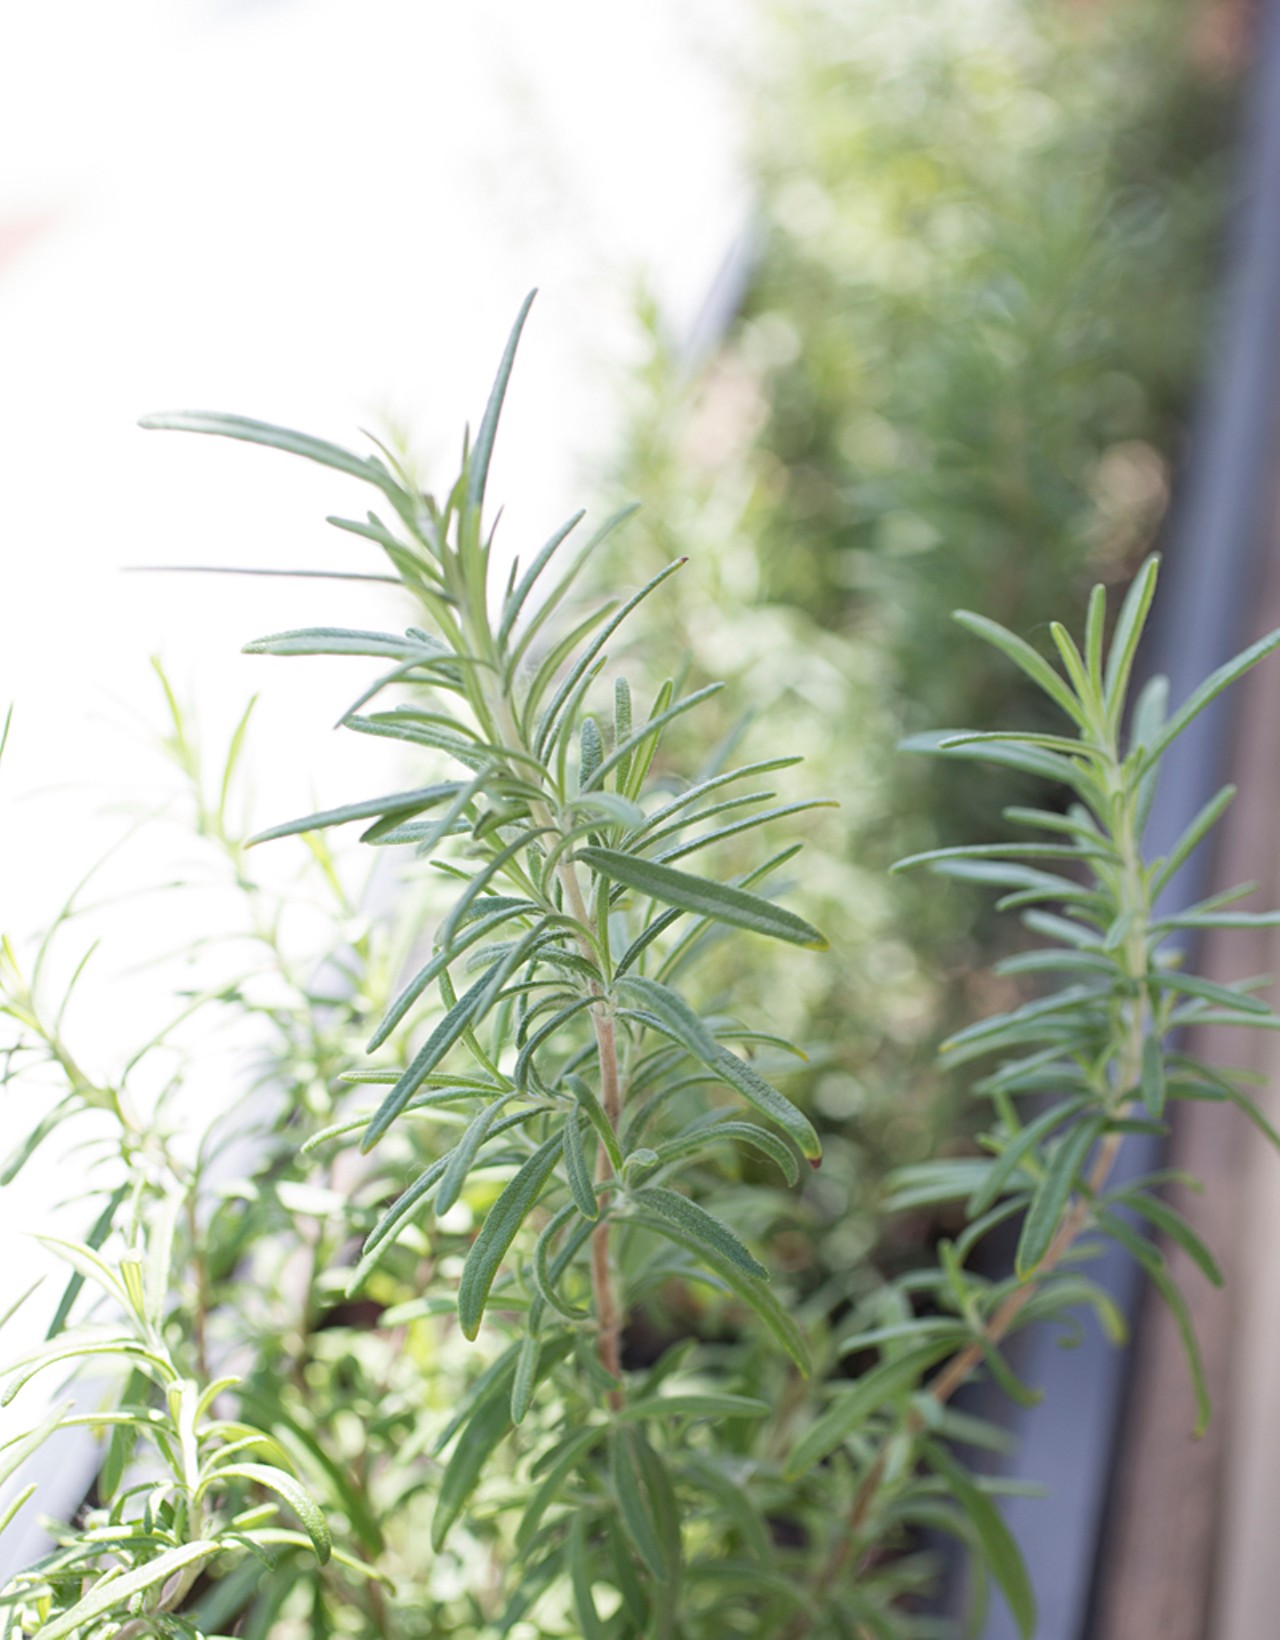 Rosemary grows in the planters surrounding the patio dining area.